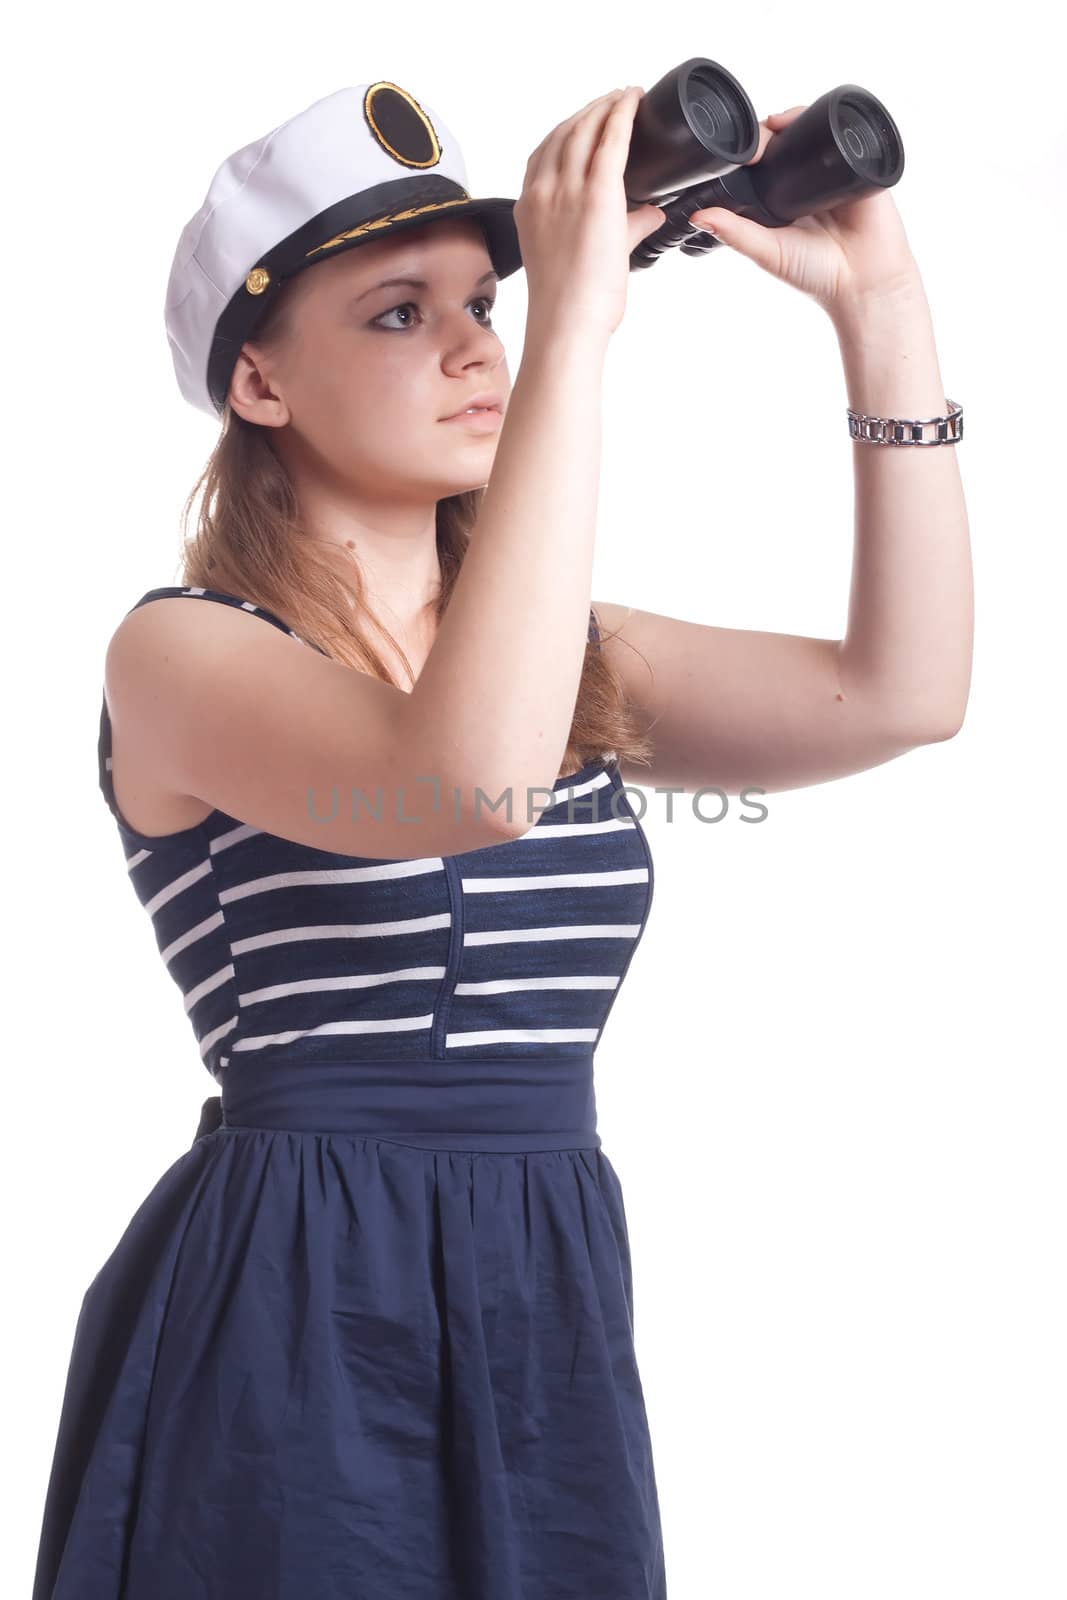 A girl in a sailor cap looks through binoculars on a white background